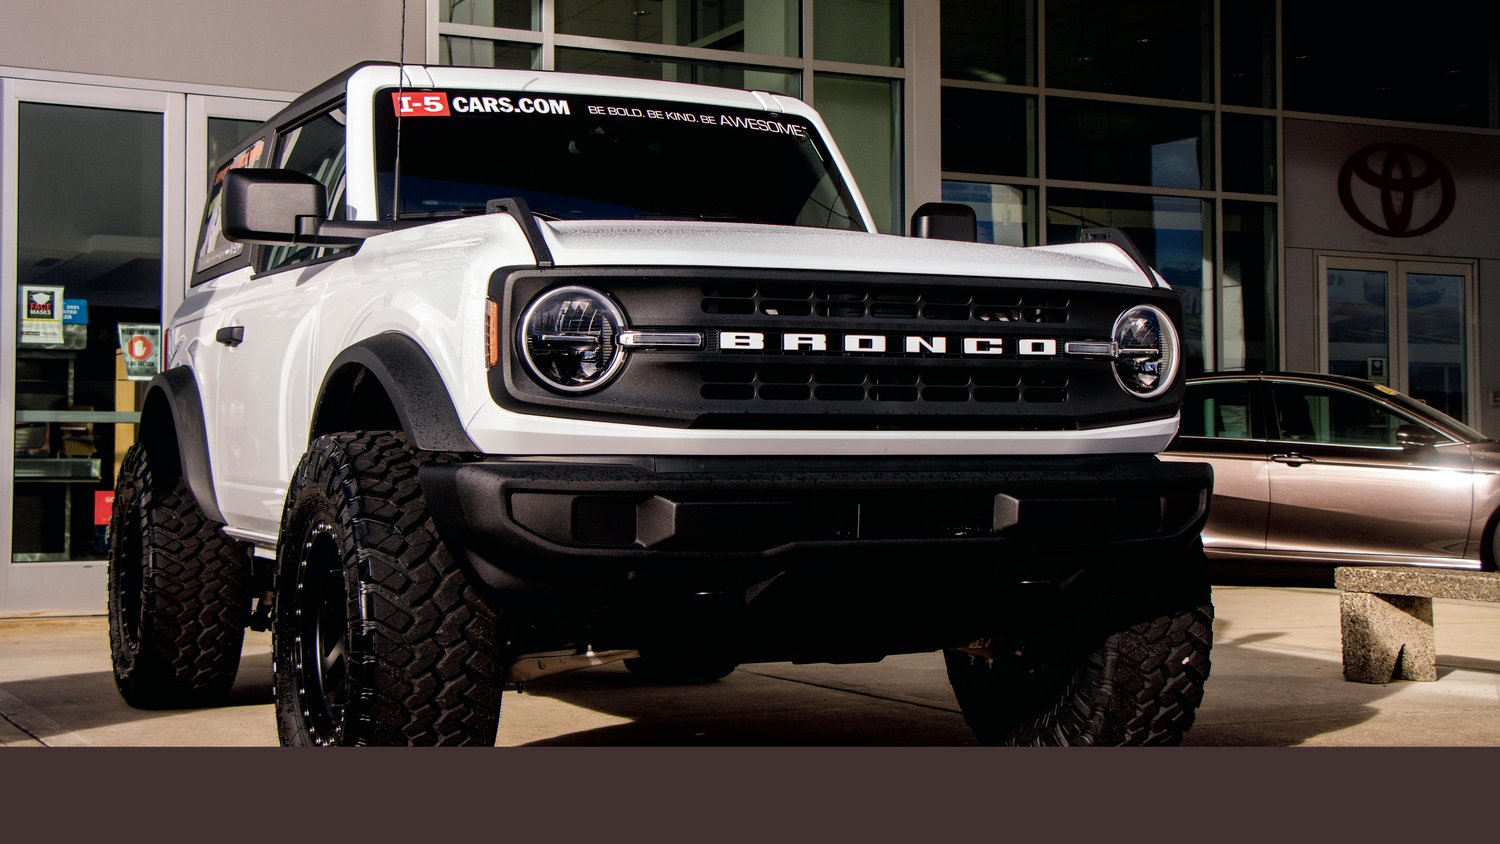 A Ford Bronco is displayed outside I-5 Toyota in Chehalis.